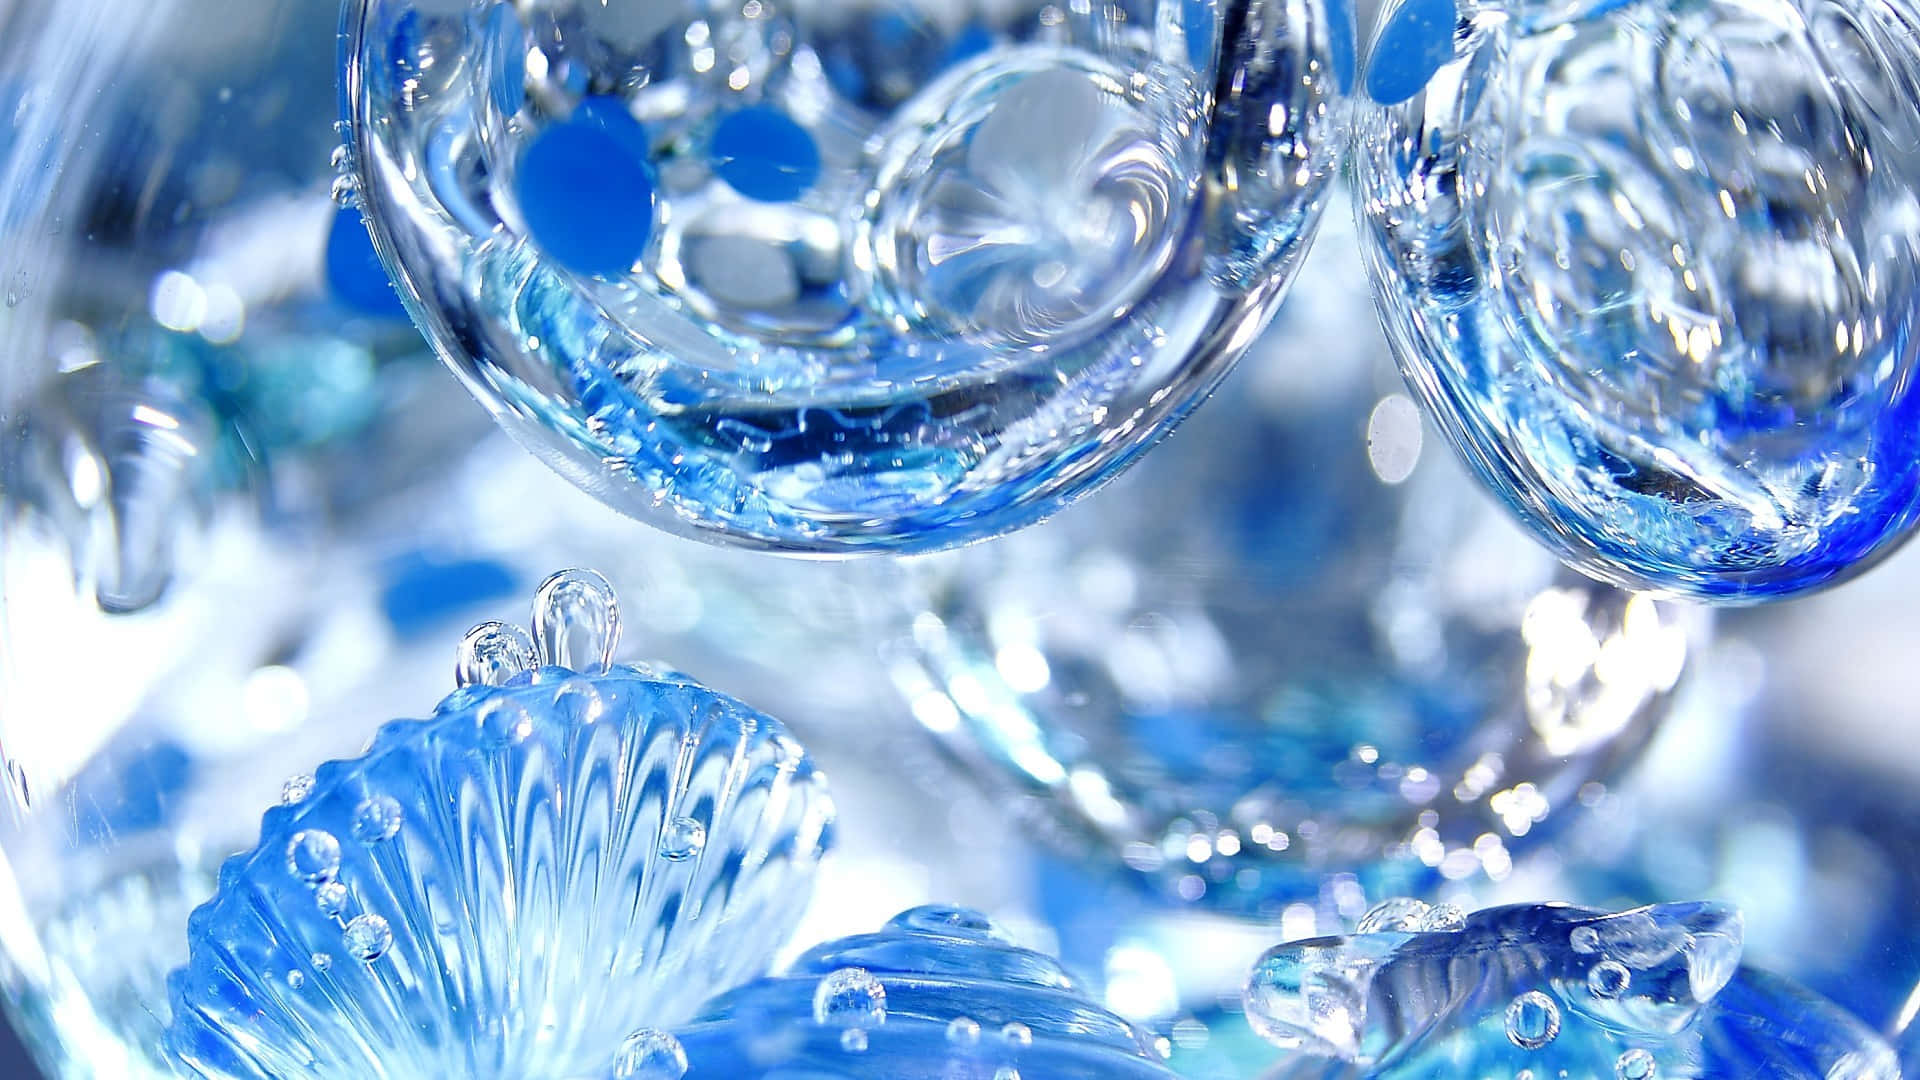 Abstract Blue Water Bubbles Background Wallpaper